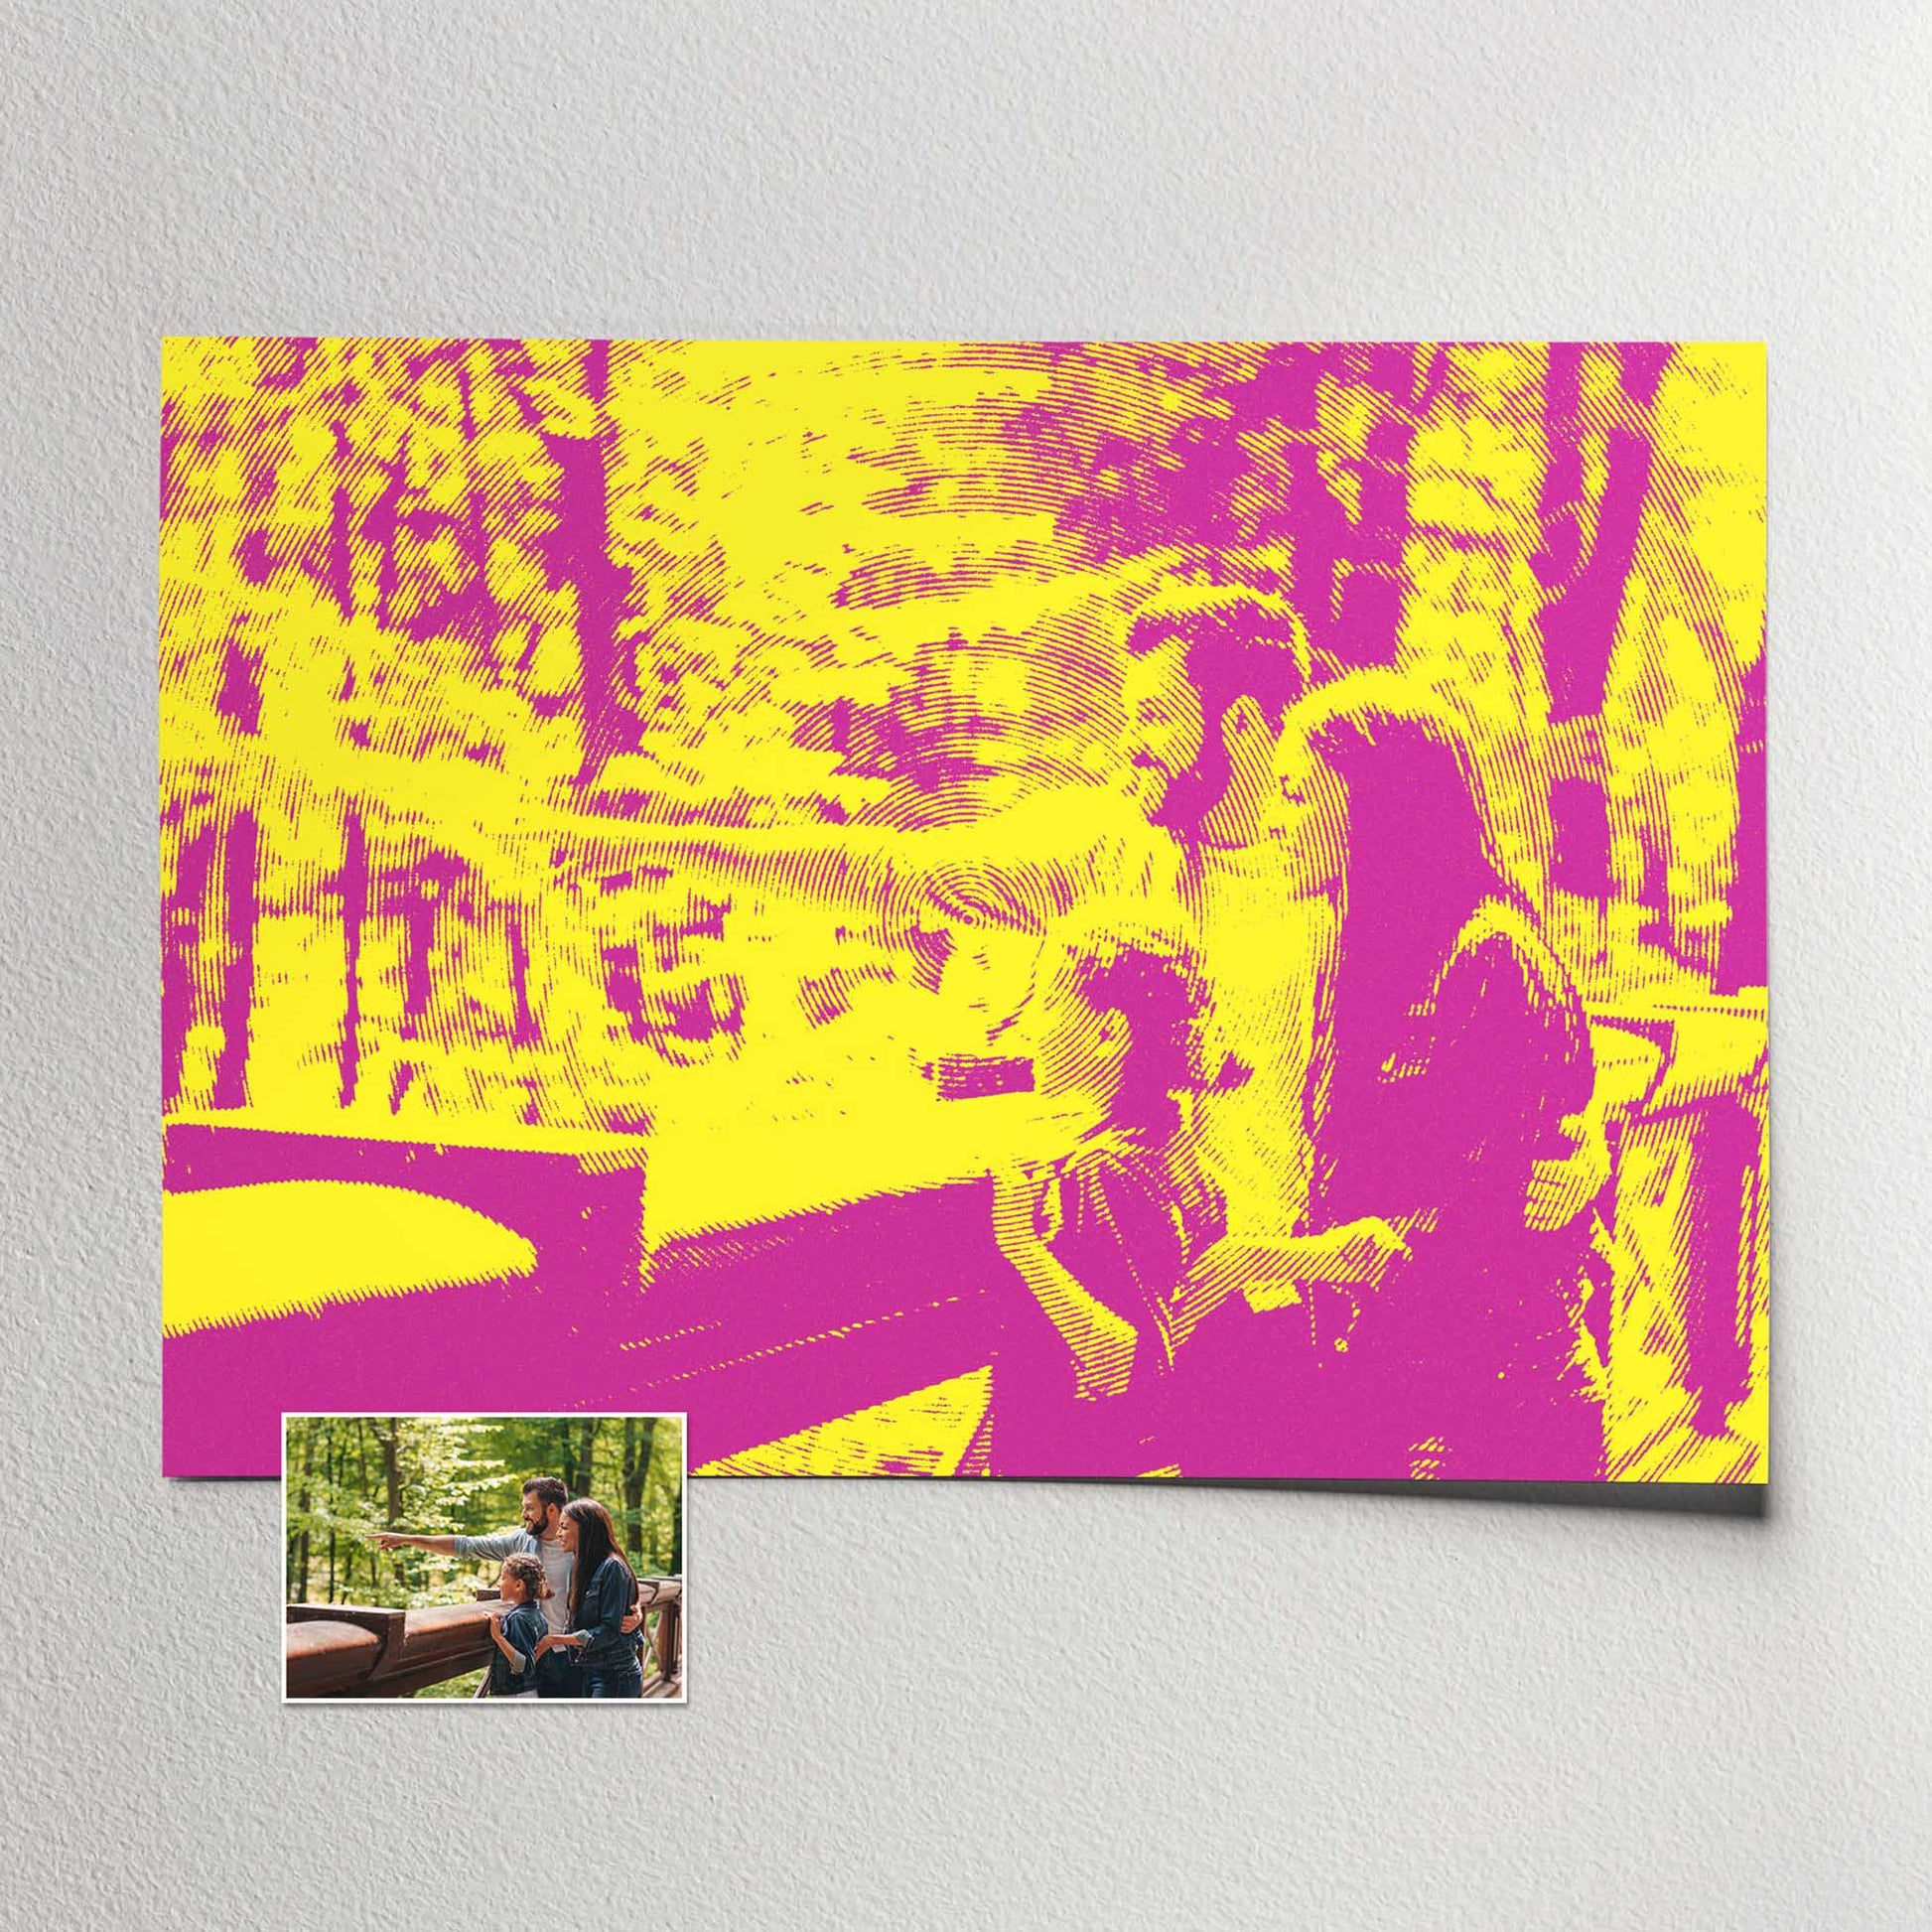 Experience the artistic allure of this Personalised Yellow & Pink Texture Print. The fusion of pink and yellow hues creates a vibrant and colorful palette that radiates joy and happiness. The modern texture effect adds a bold and creative energy